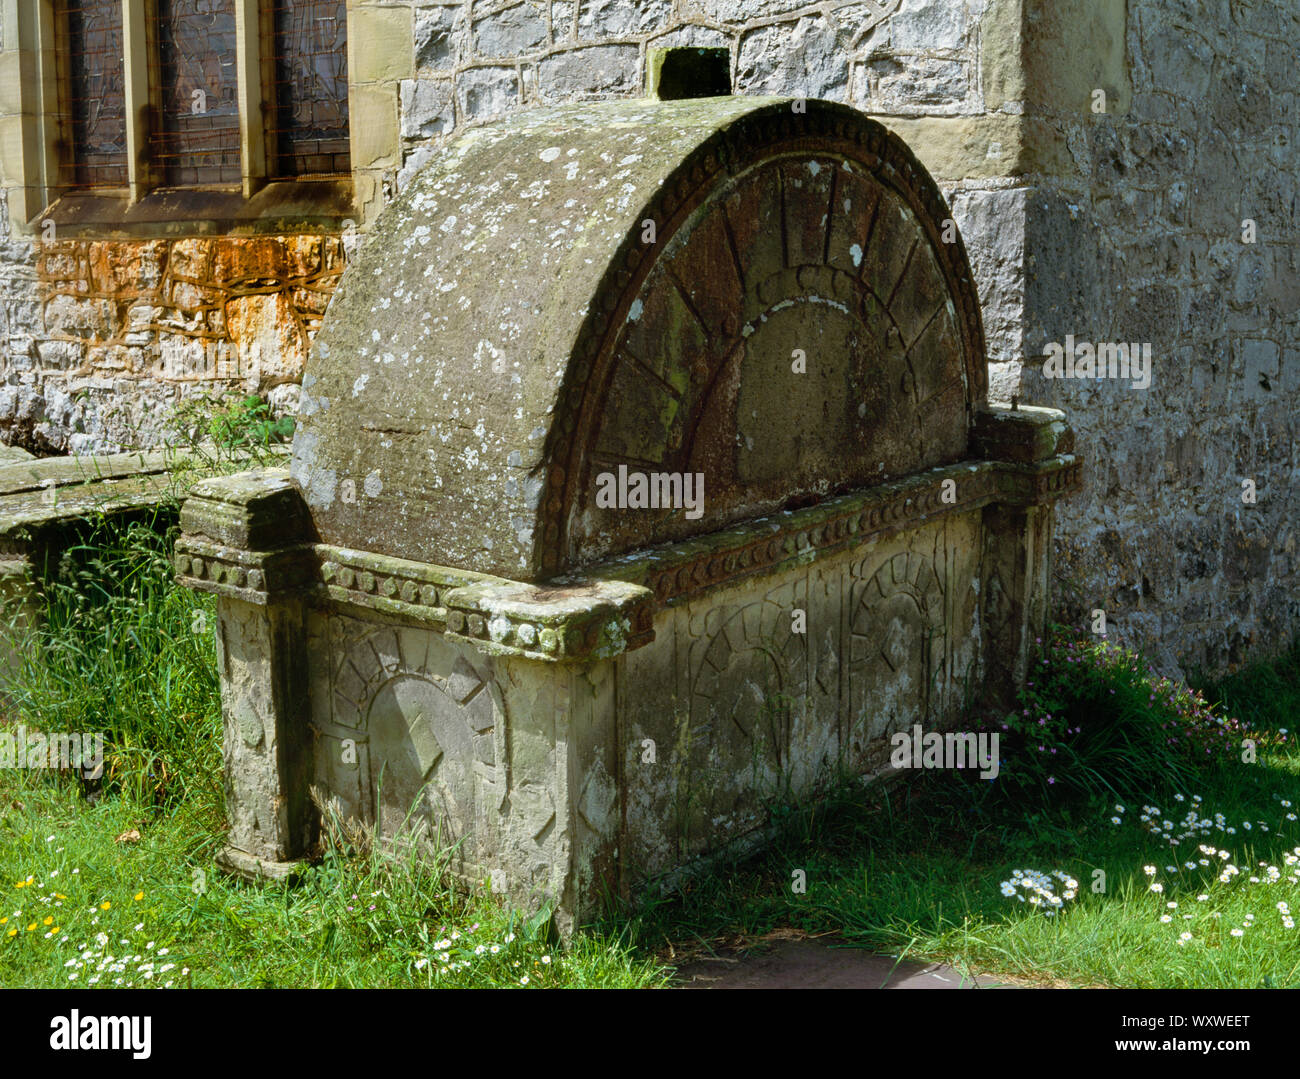 Hooded tomb, St Michael’s Church, Trelawnyd, Flintshire, Wales. One of 7 tombs to the Wynne family. Uniquely local style. Stock Photo